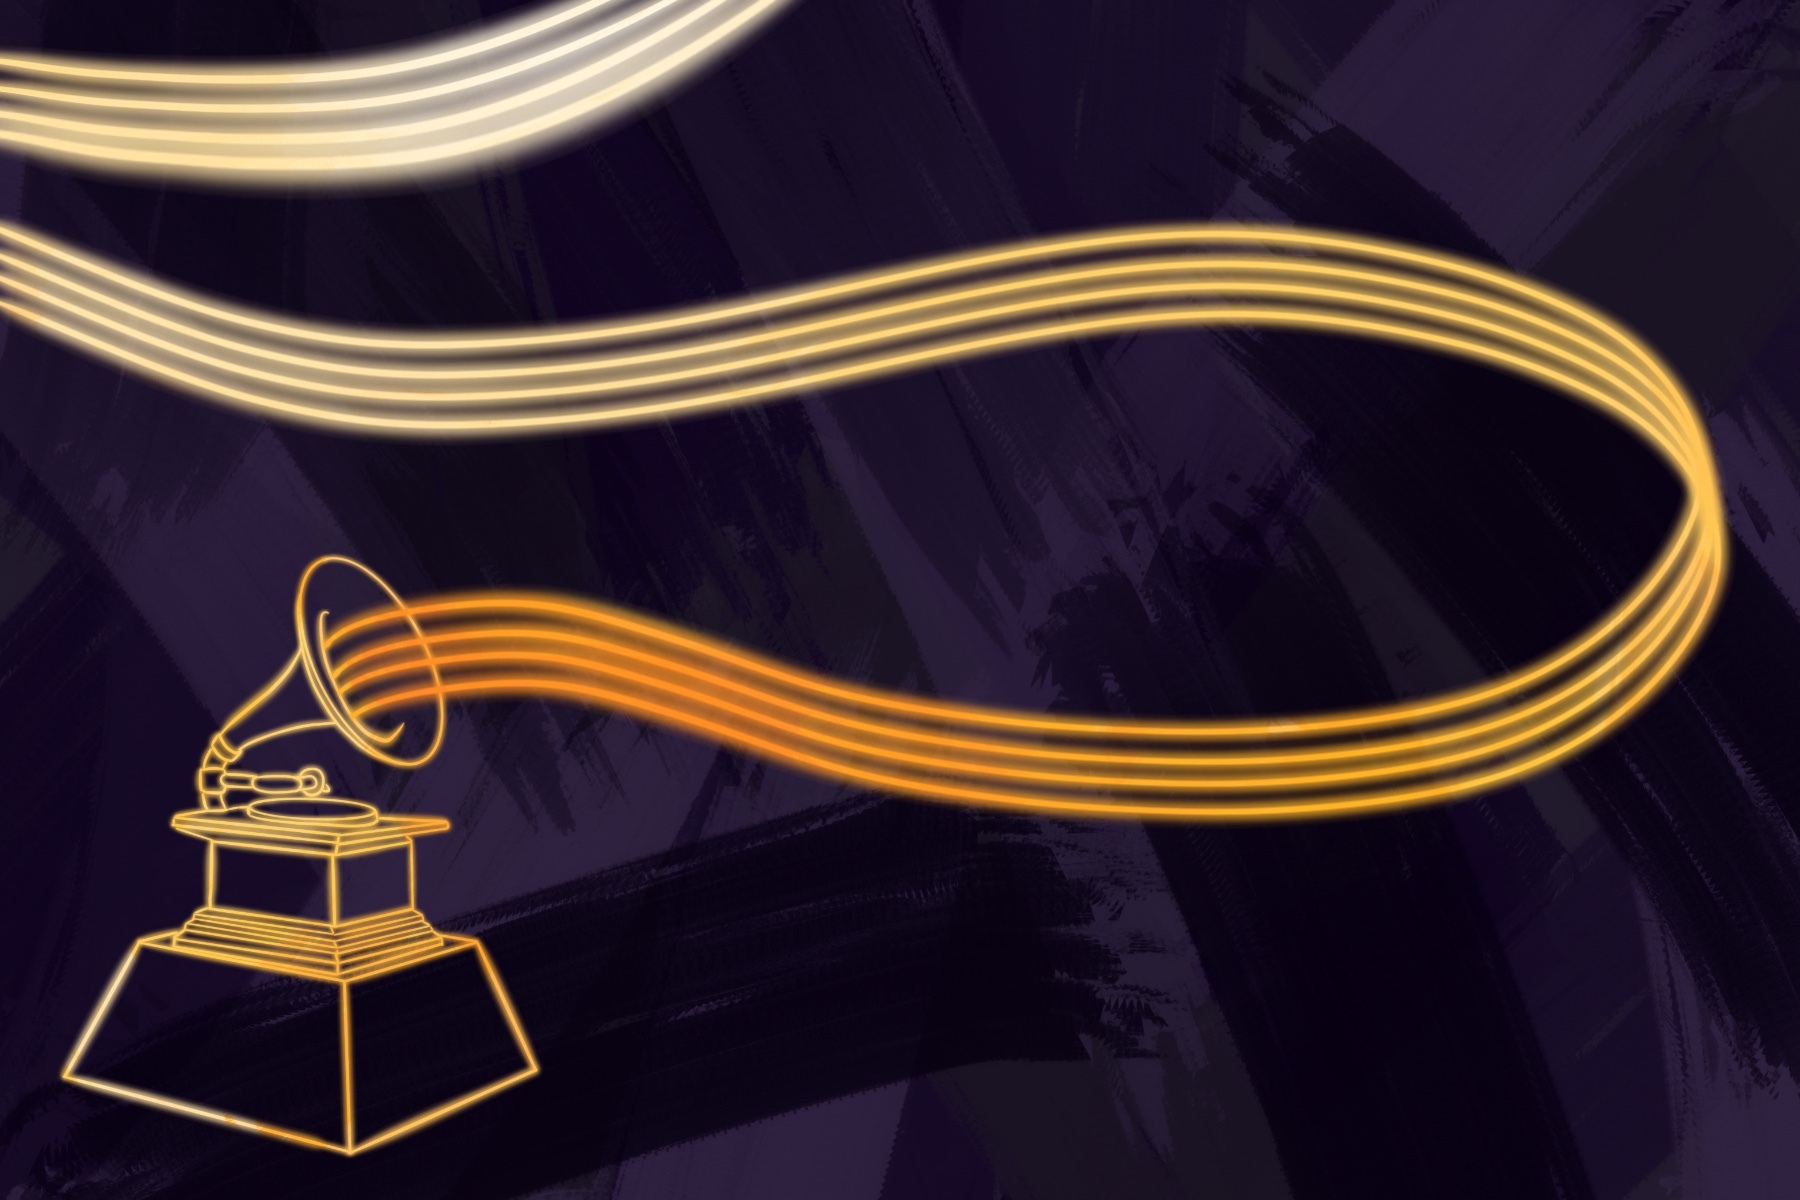 Illustration of a Grammy in article about the Grammys